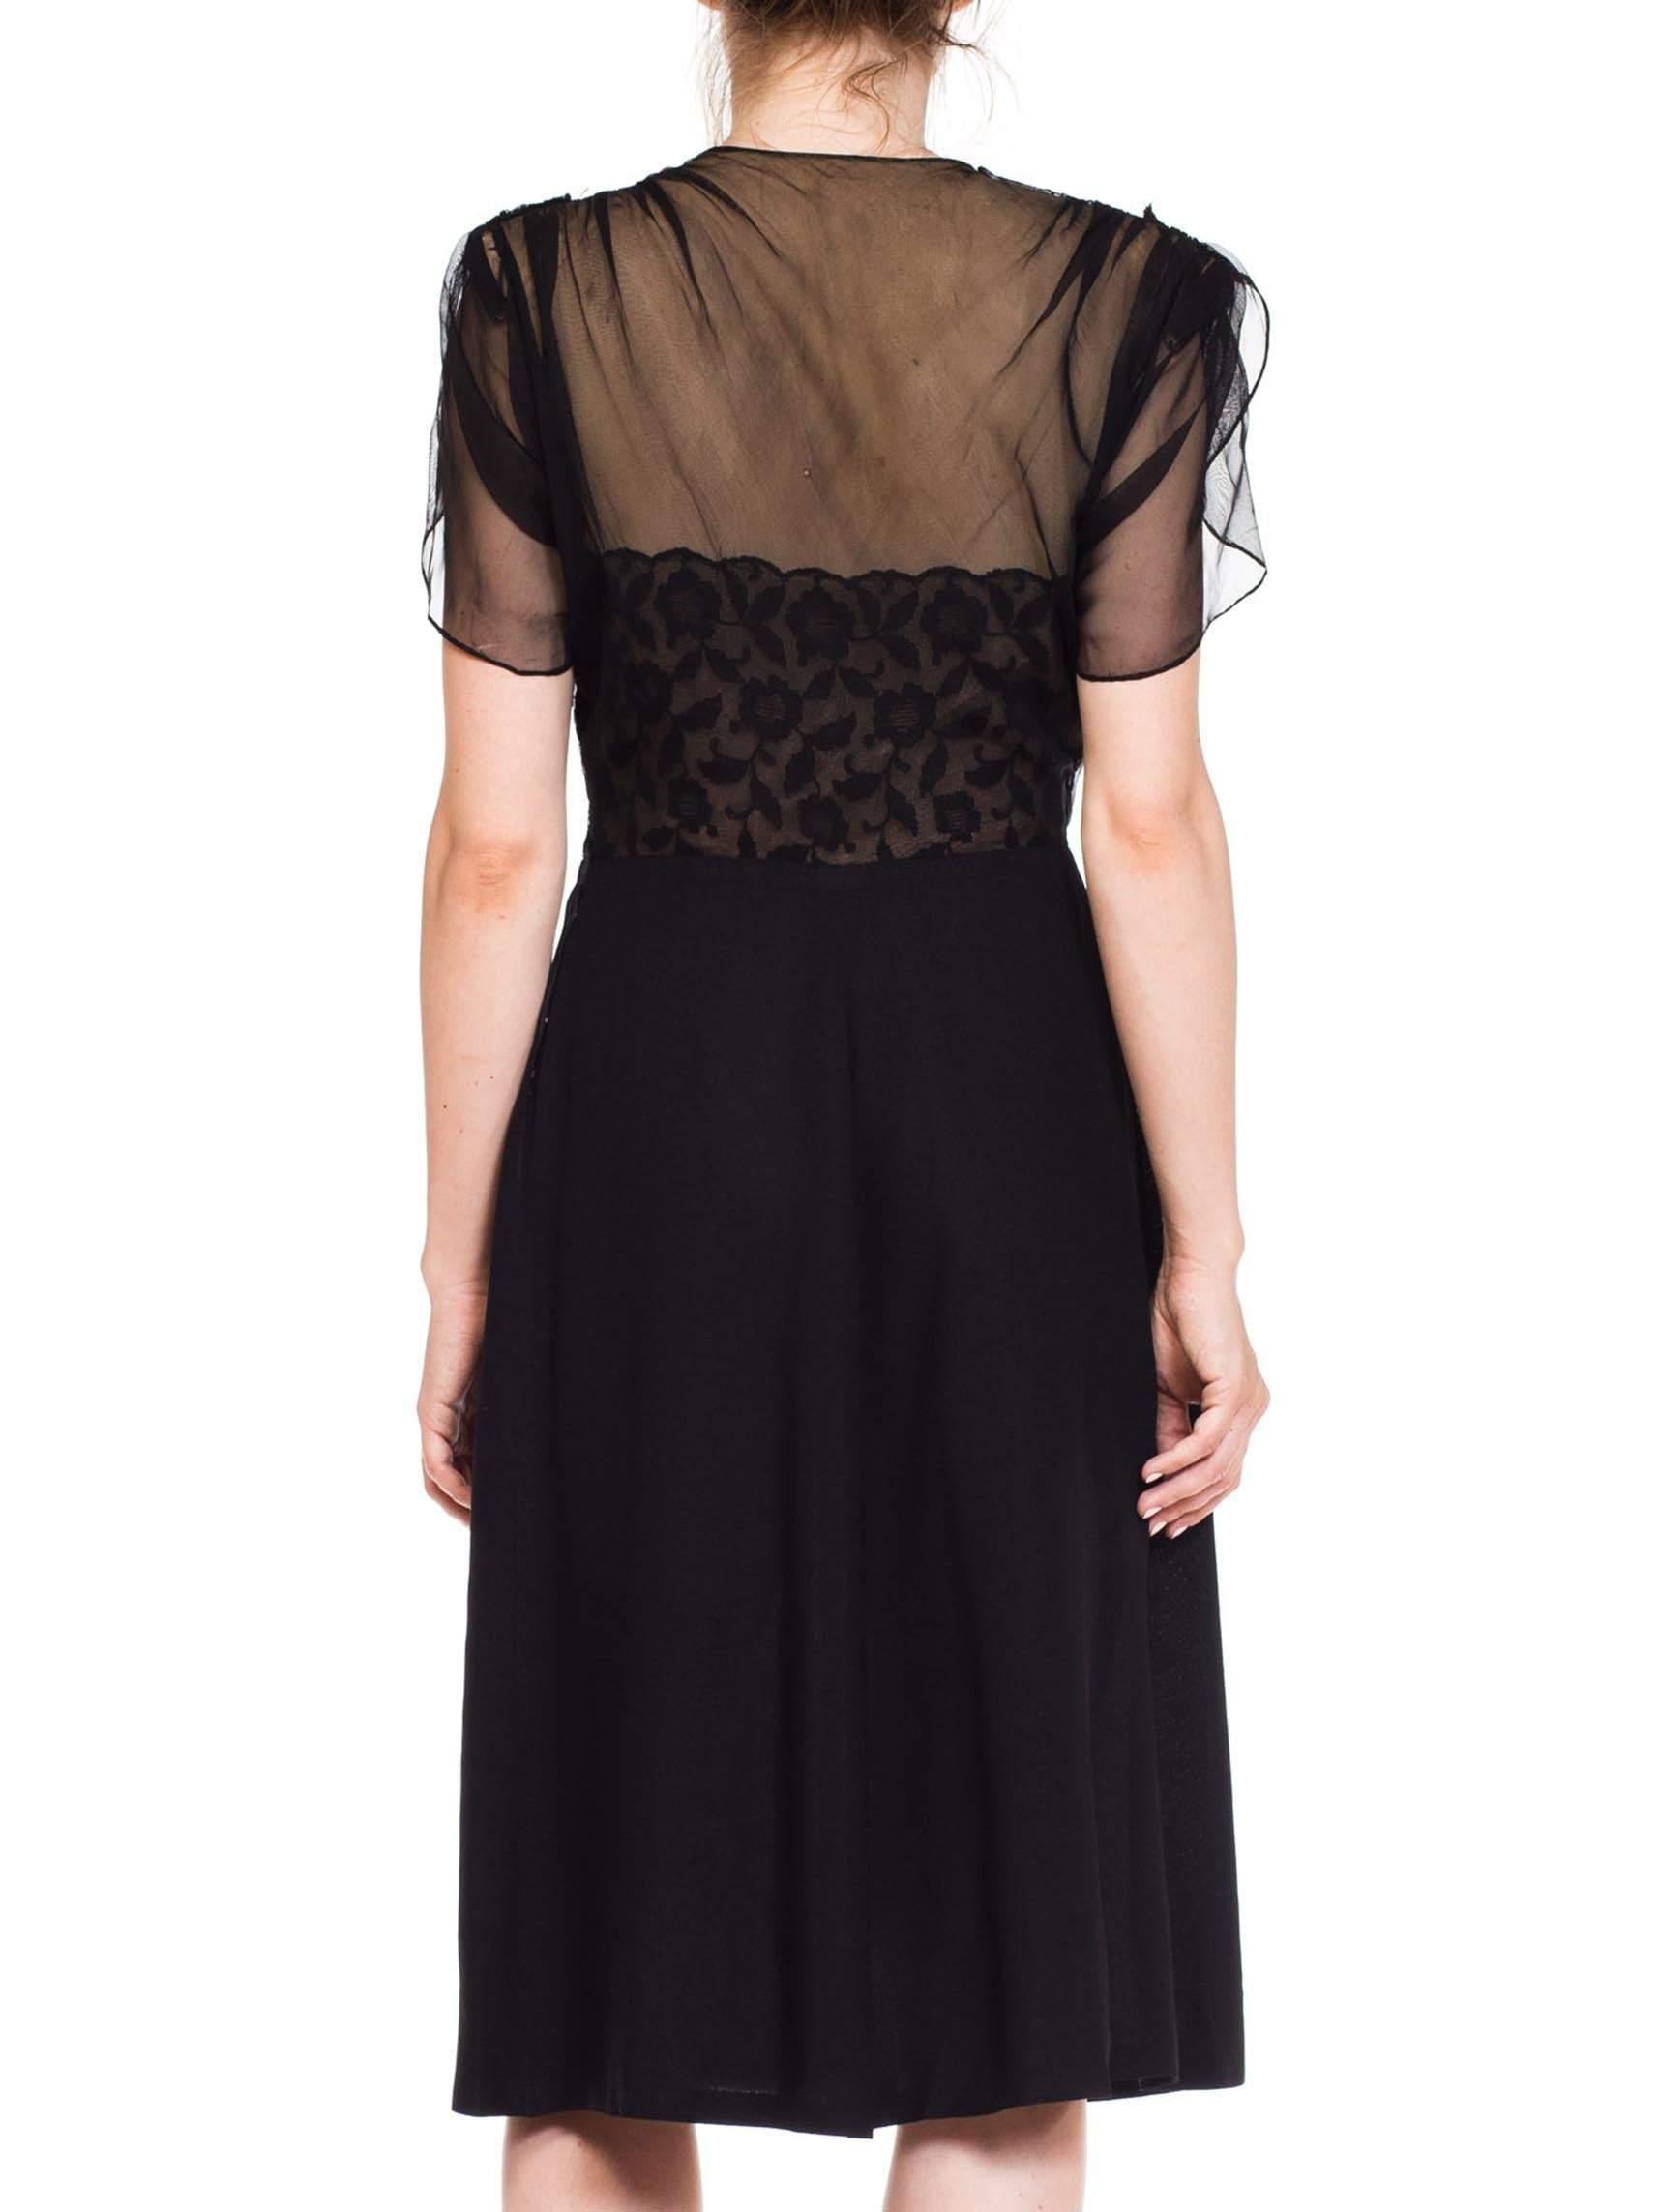 1940S Black Sheer Nylon & Lace Fitted Cocktail Dress In Excellent Condition For Sale In New York, NY